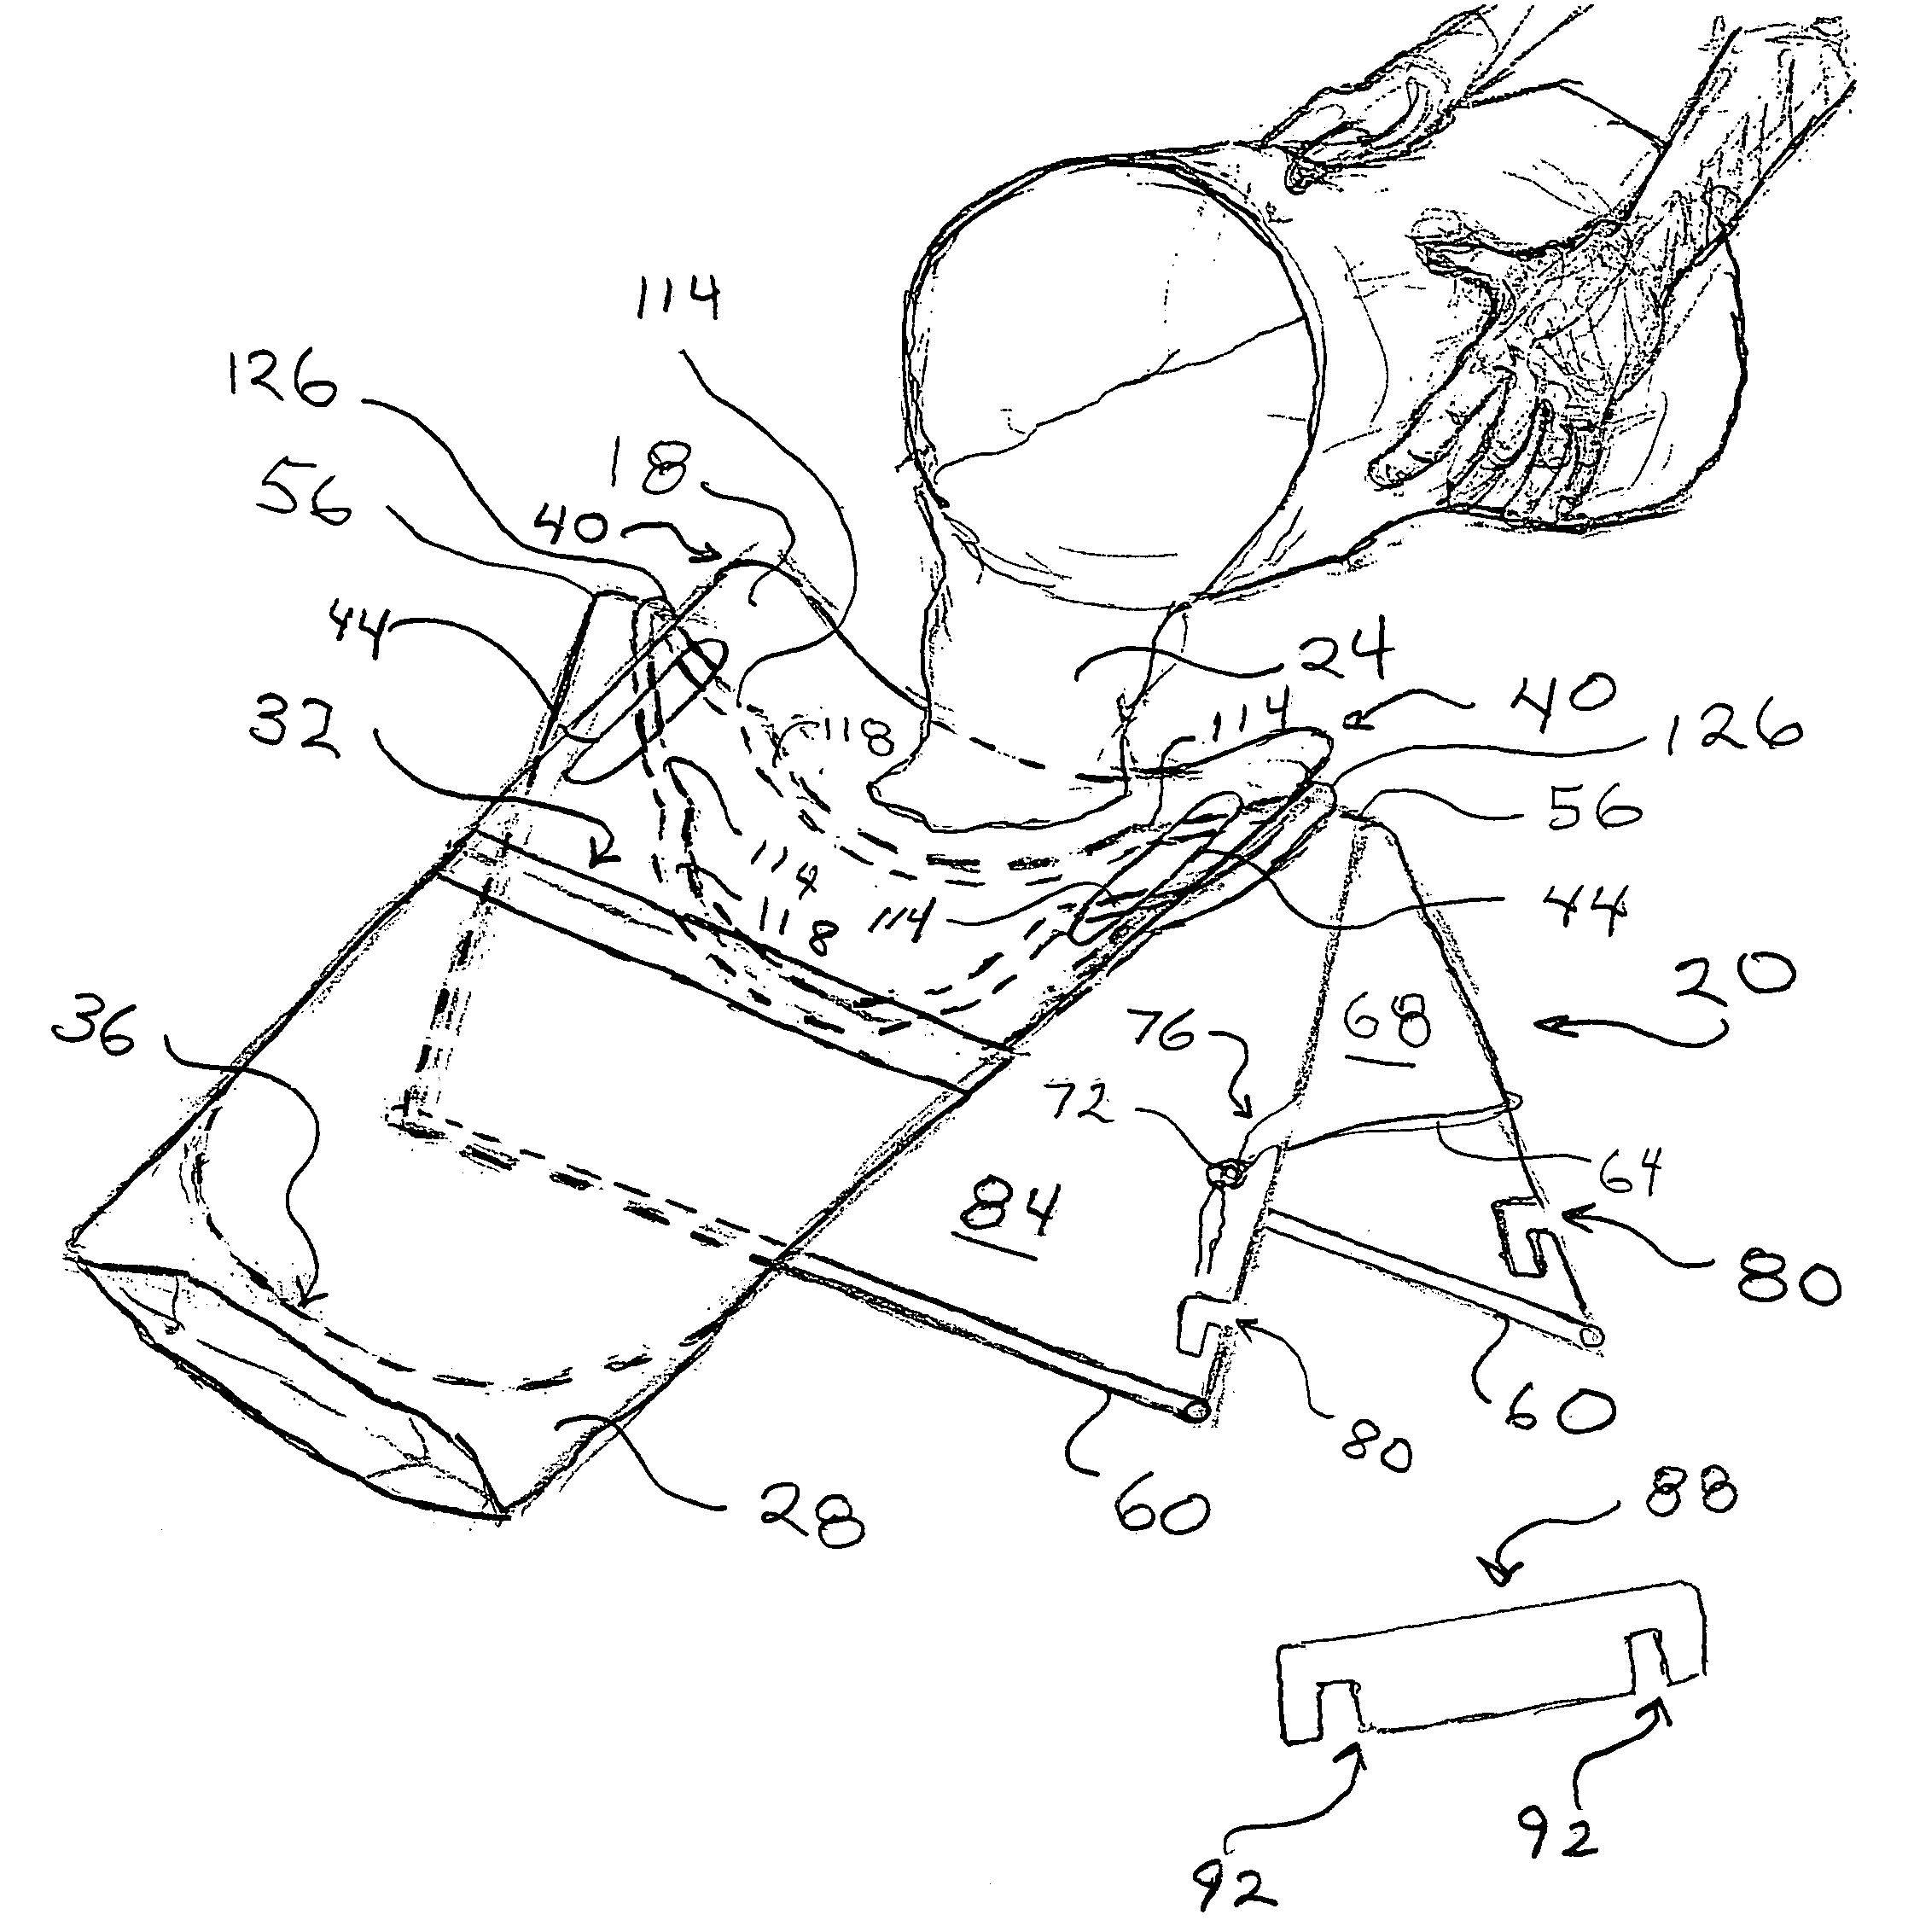 Method and device for inserting a food stuff into a pliable bag